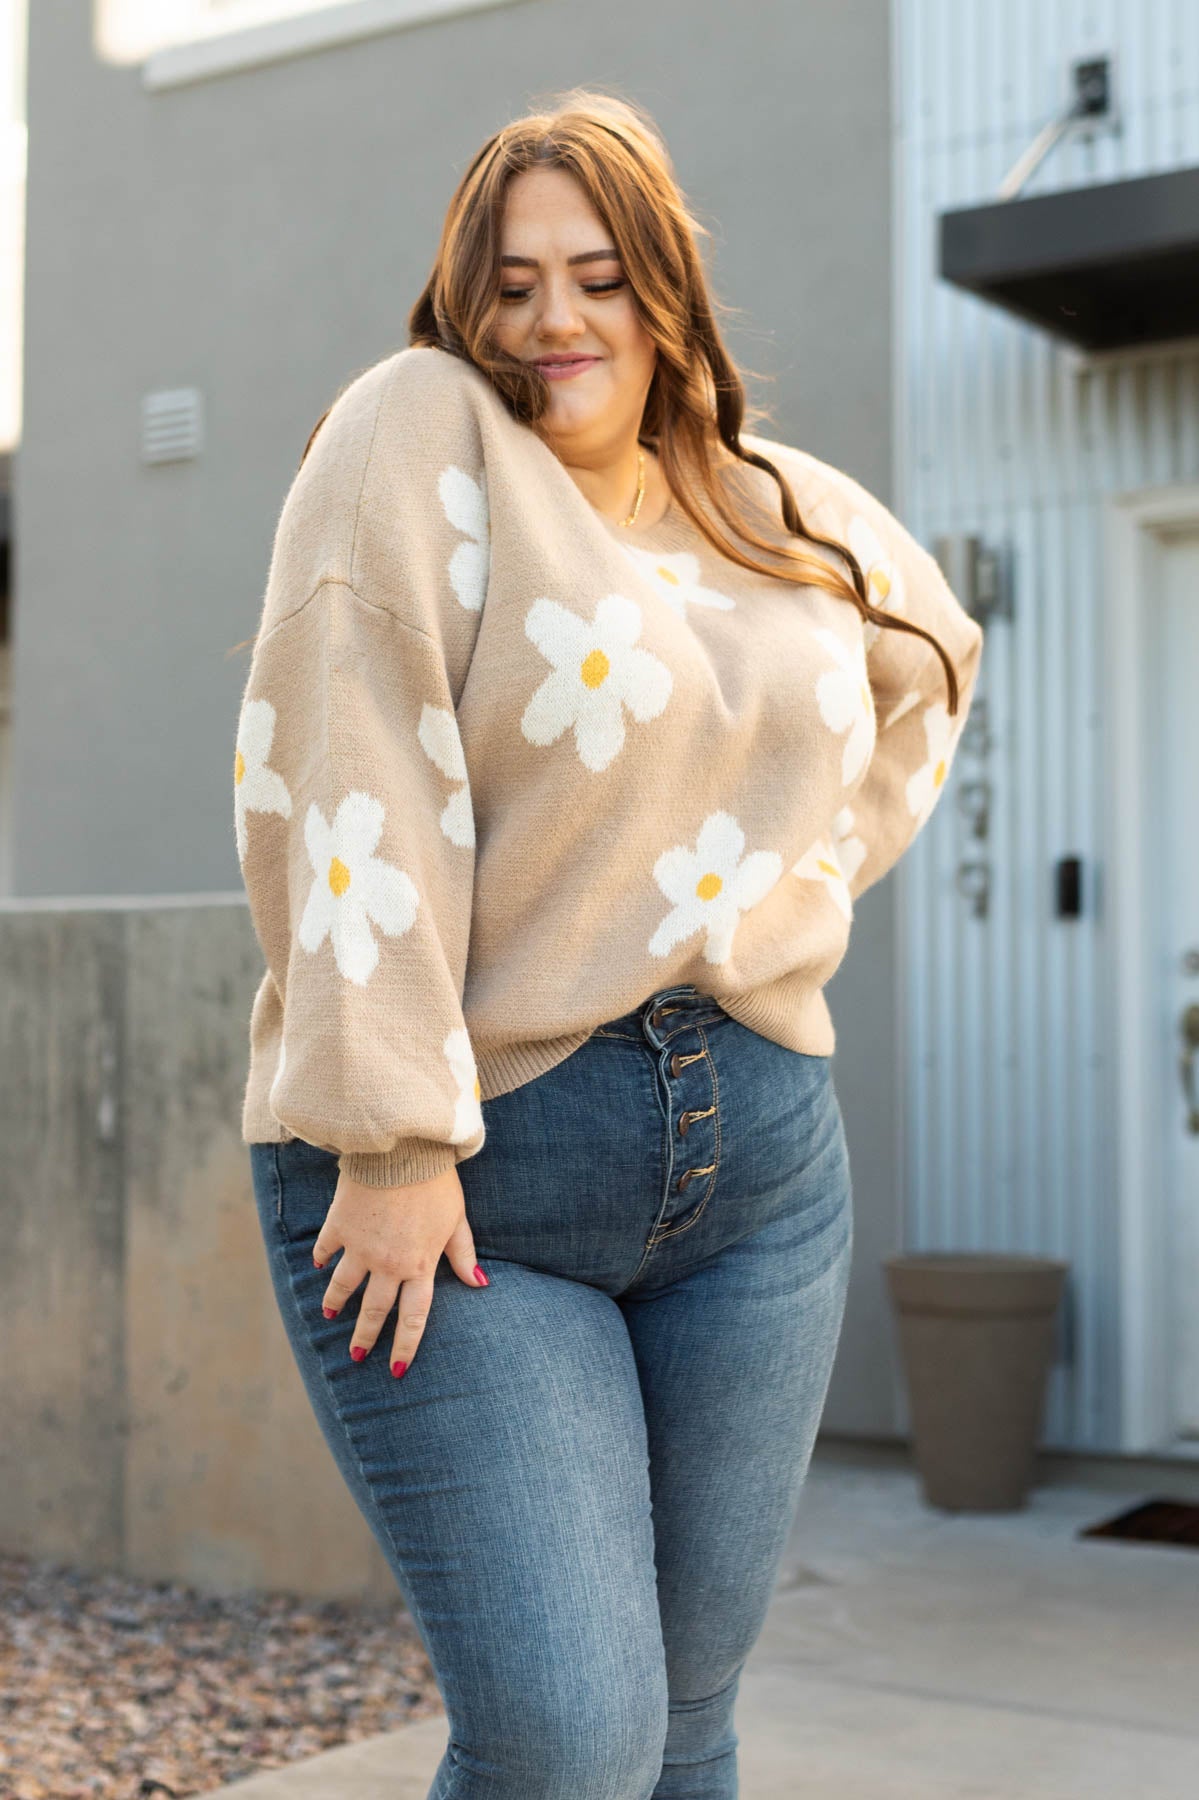 Long sleeve plus size beige sweater with drop shoulder